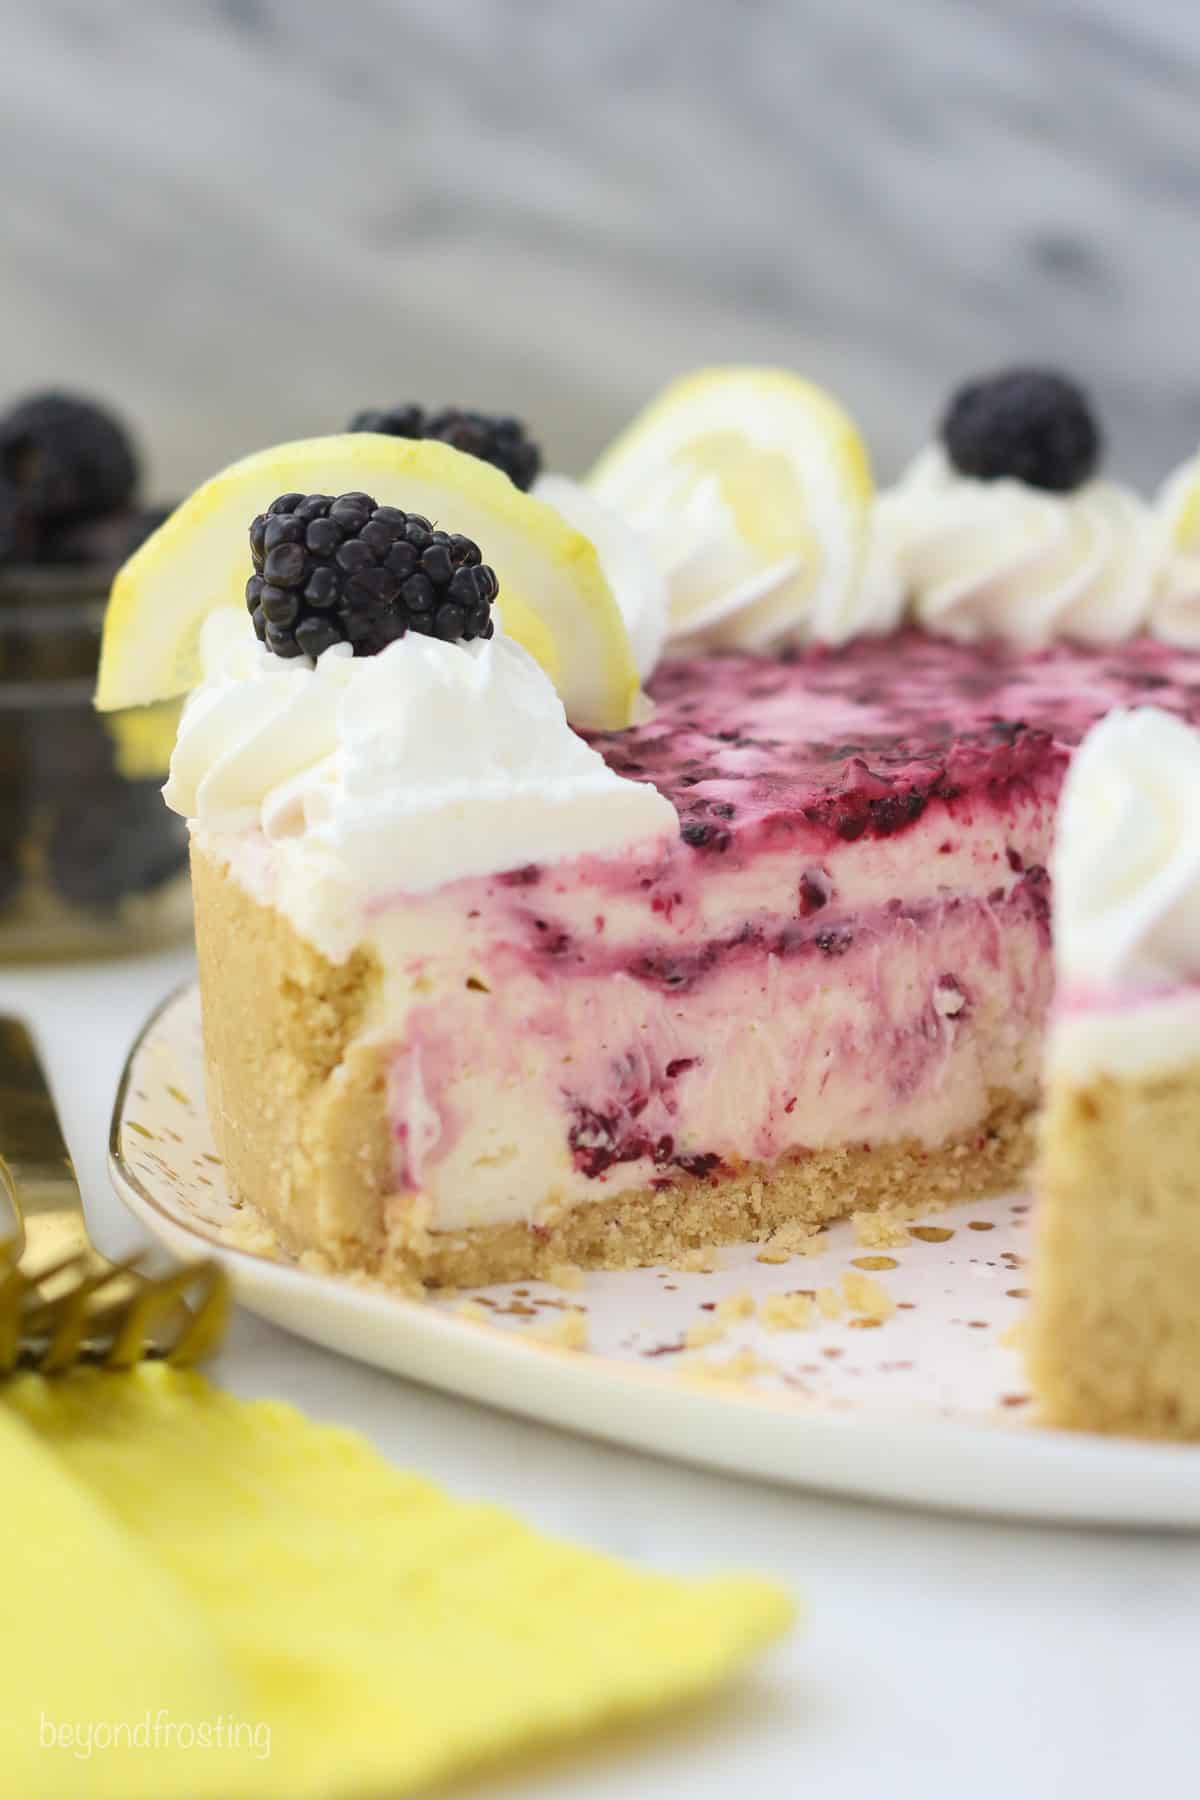 A no bake blackberry lemon cheesecake garnished with whipped cream and fresh blackberries with a slice missing.